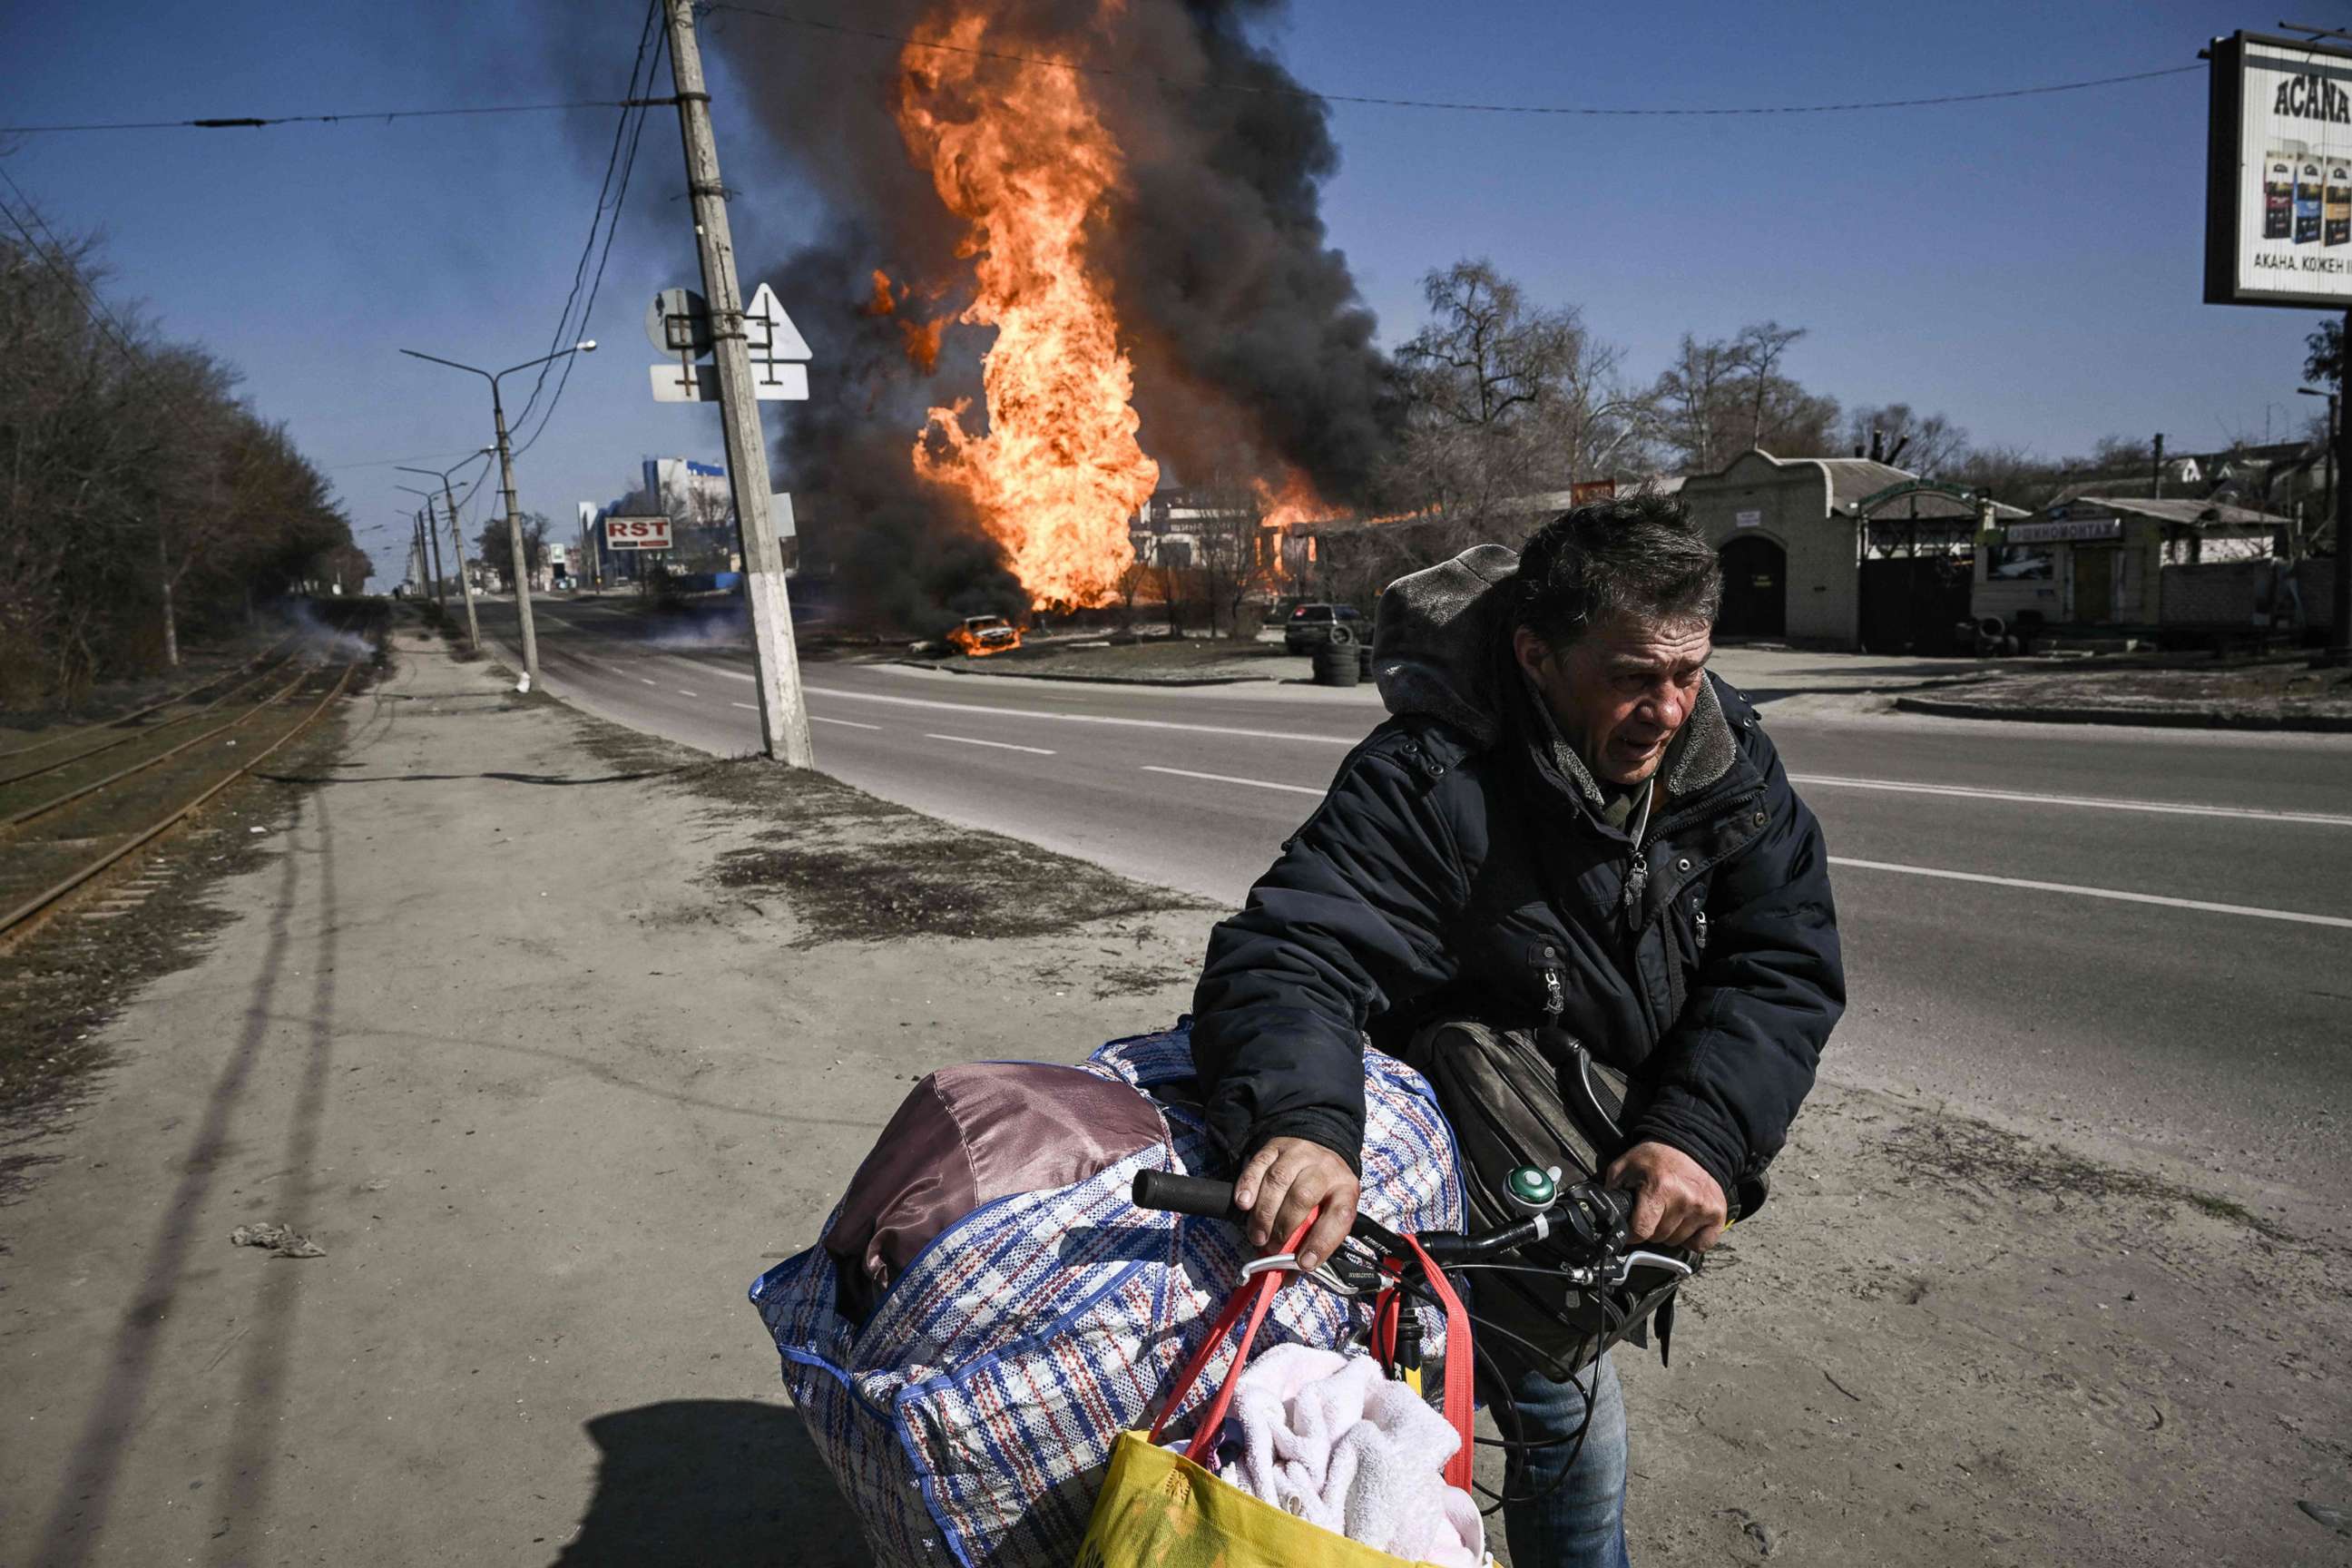 PHOTO: A man flees with his belongings as fire engulfs a vehicle and building followiA man flees with his belongings as fire engulfs a vehicle and building following artillery fire in the northeastern Ukrainian city of Kharkiv on March 25, 2022.